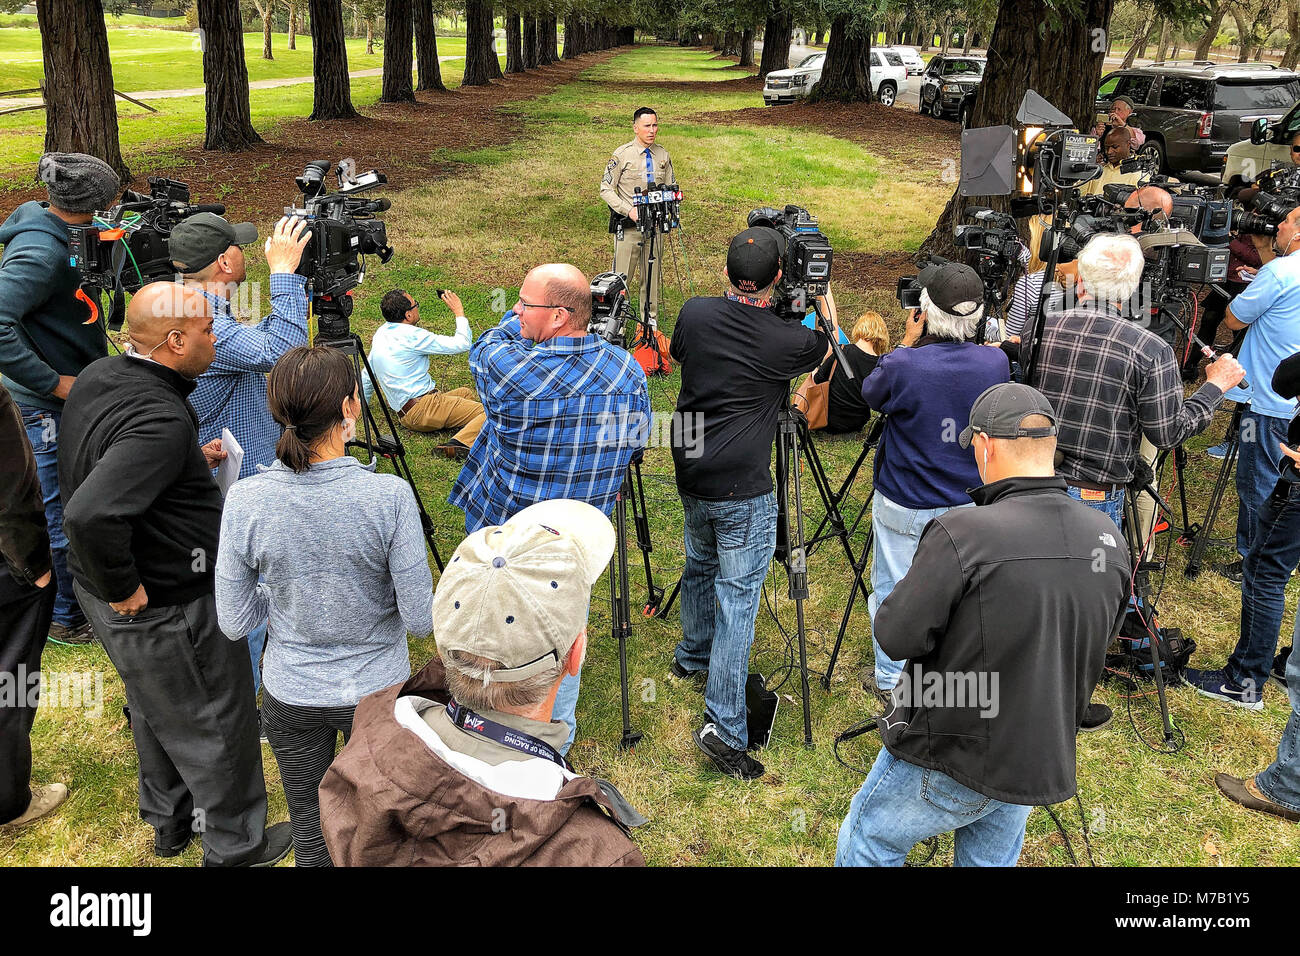 Yountville, California, USA. 9th Mar, 2018. Sgt. ROBERT NACKE, public information officer for the California Highway Patrol Golden Gate division, addresses the media during a press conference near the grounds of the California Veterans Home at Yountville. Law enforcement was responding to reports of an active shooter who was holding three people hostage at the facility. Credit: JL Sousa/Napa Valley Register/ZUMA Wire/Alamy Live News Stock Photo